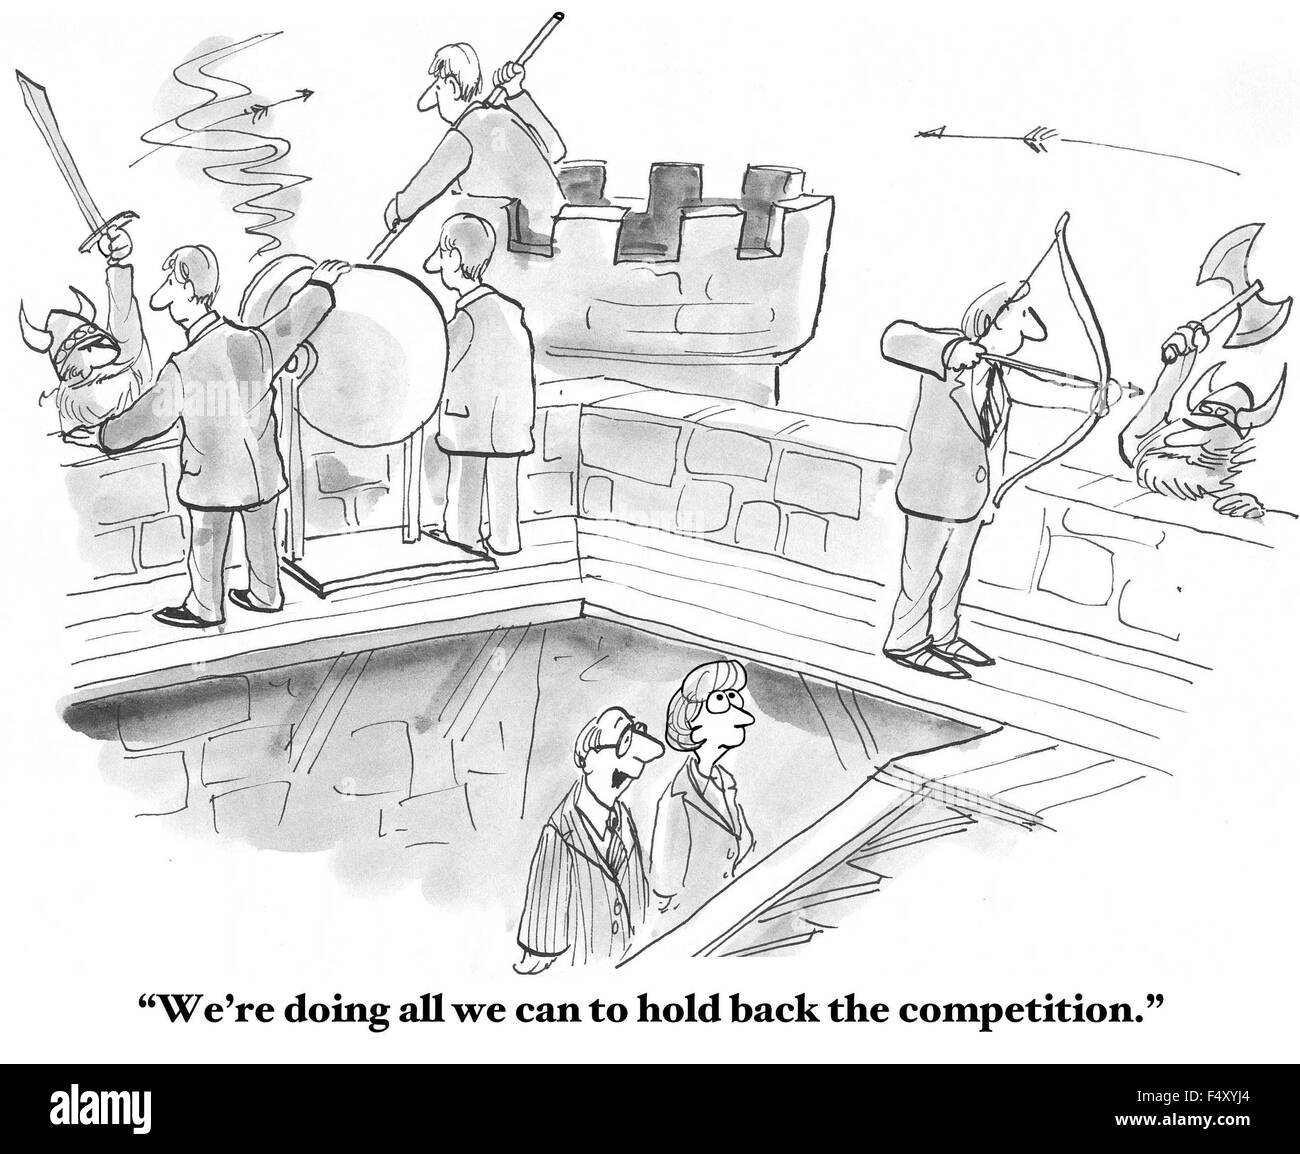 Business cartoon showing businessmen fighting warriors, 'We're doing all we can to hold back the competition'. Stock Photo